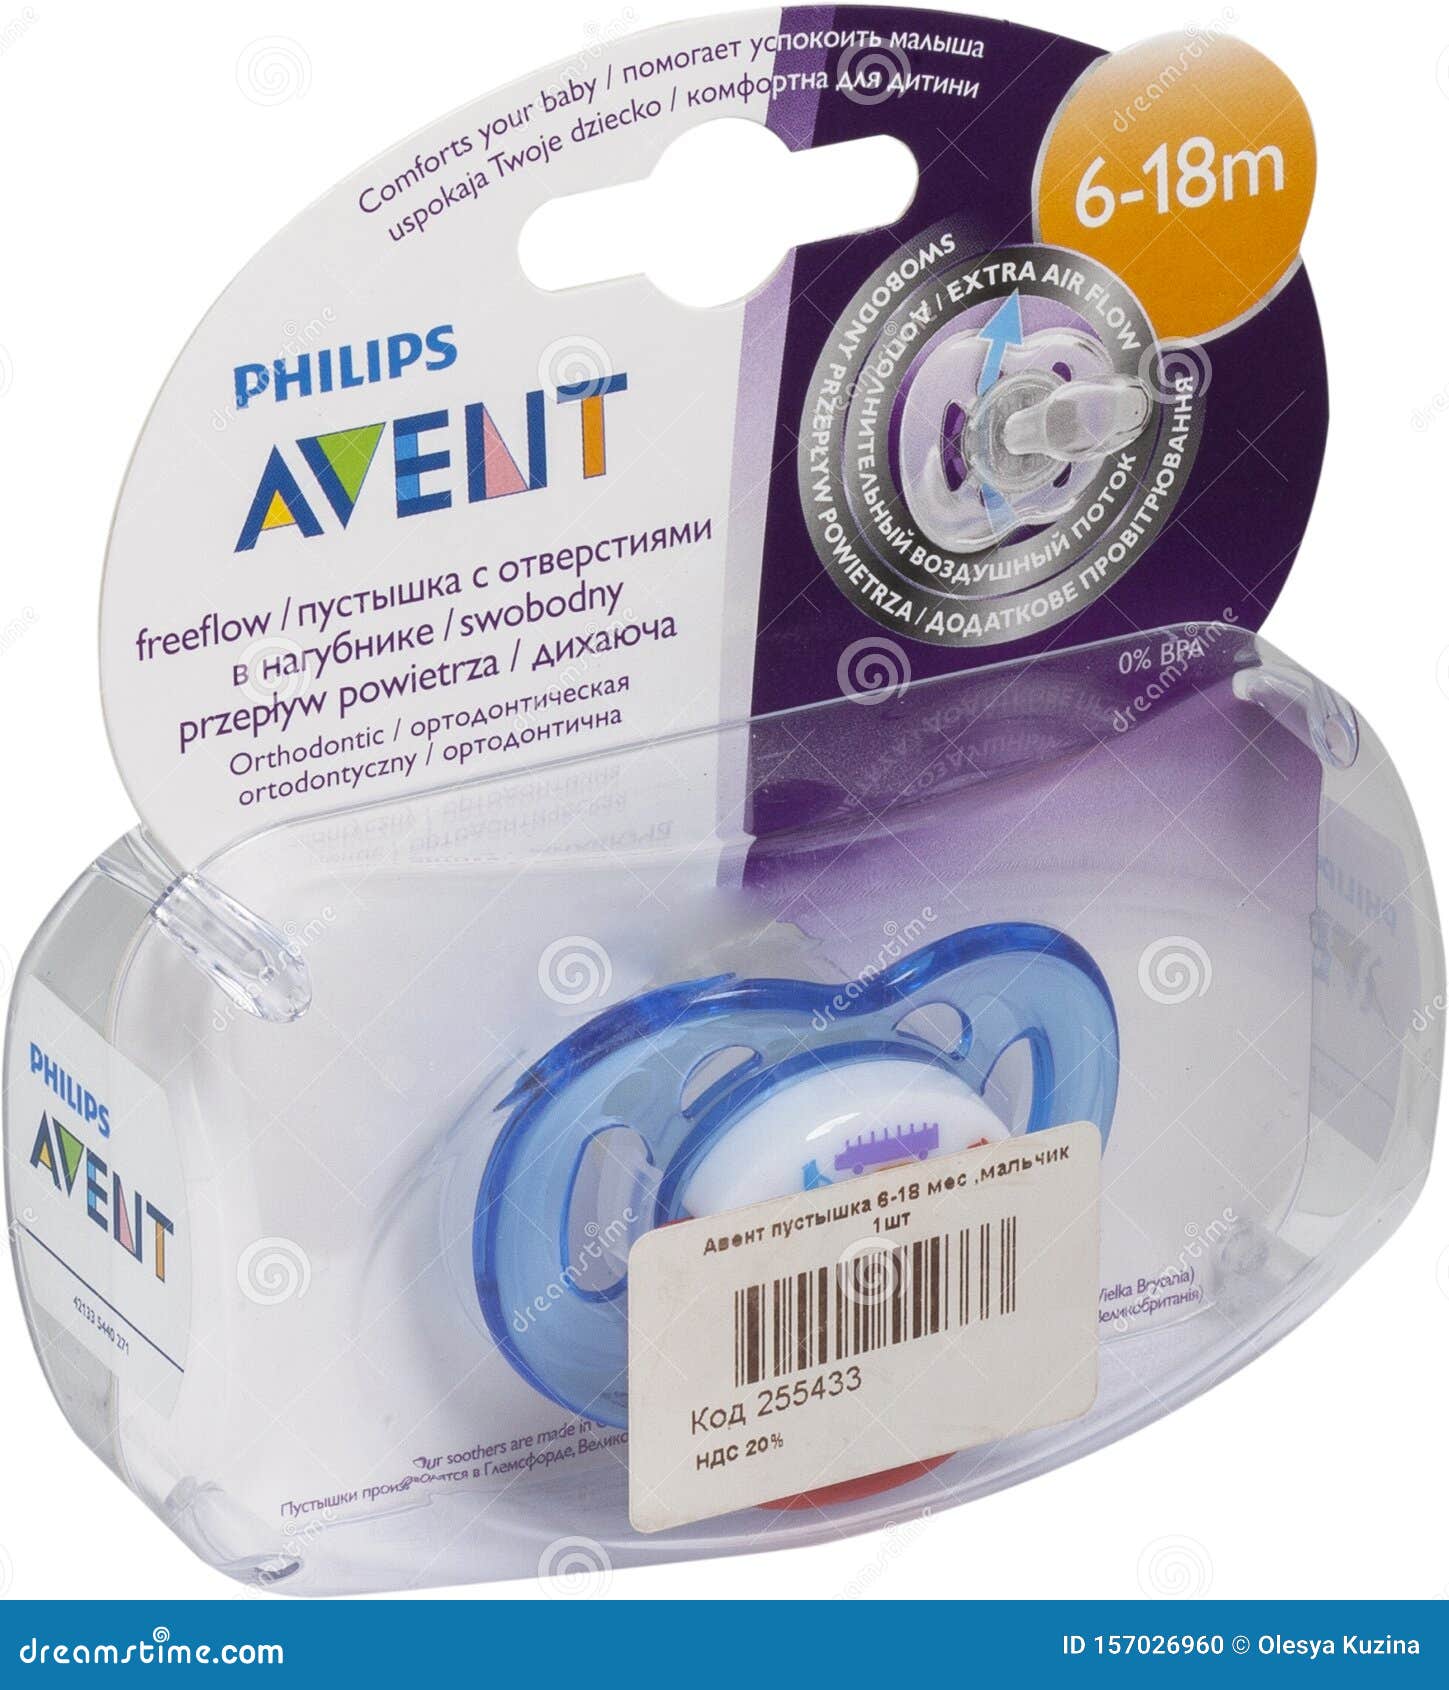 avent package